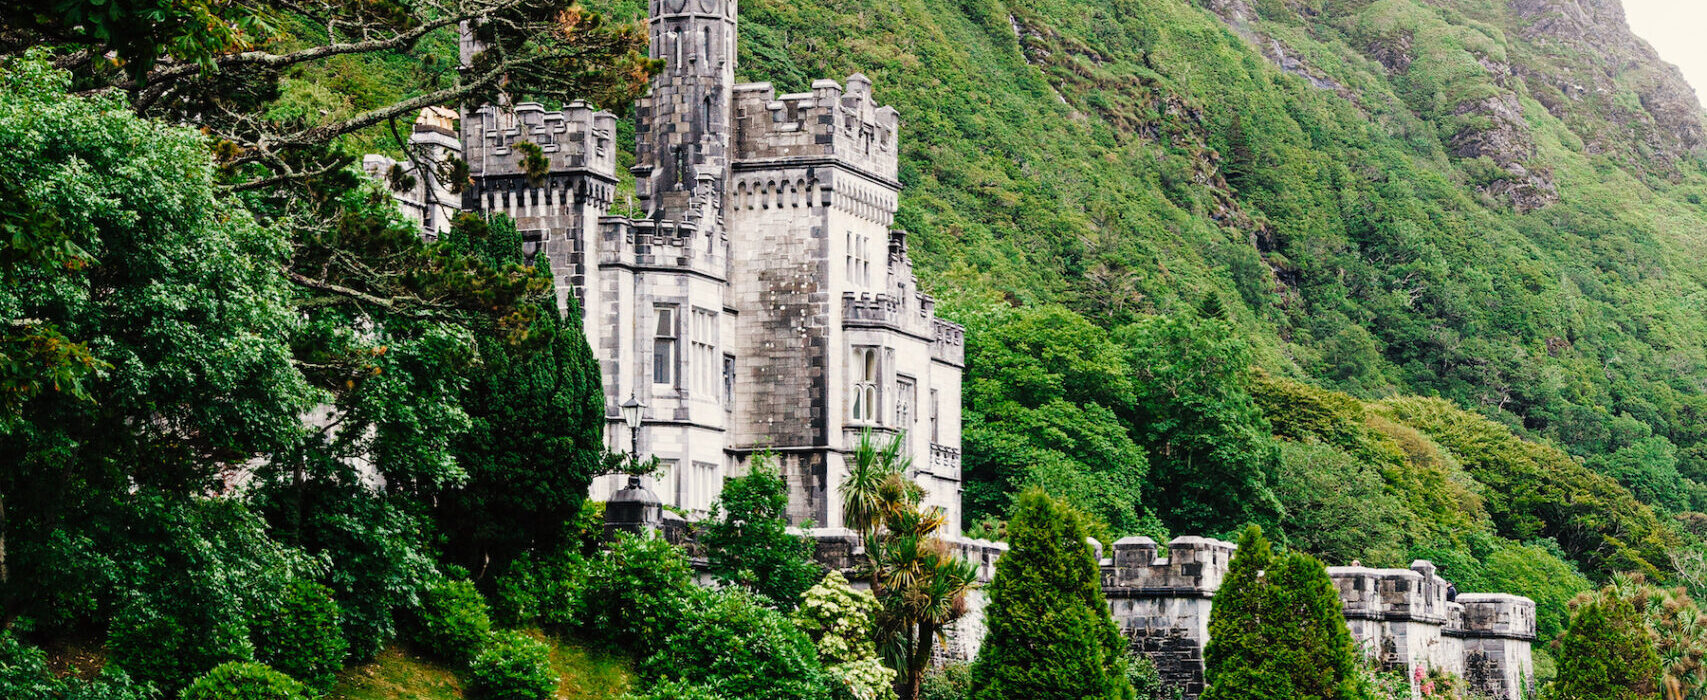 Kylemore Abbey - What to do in Ireland